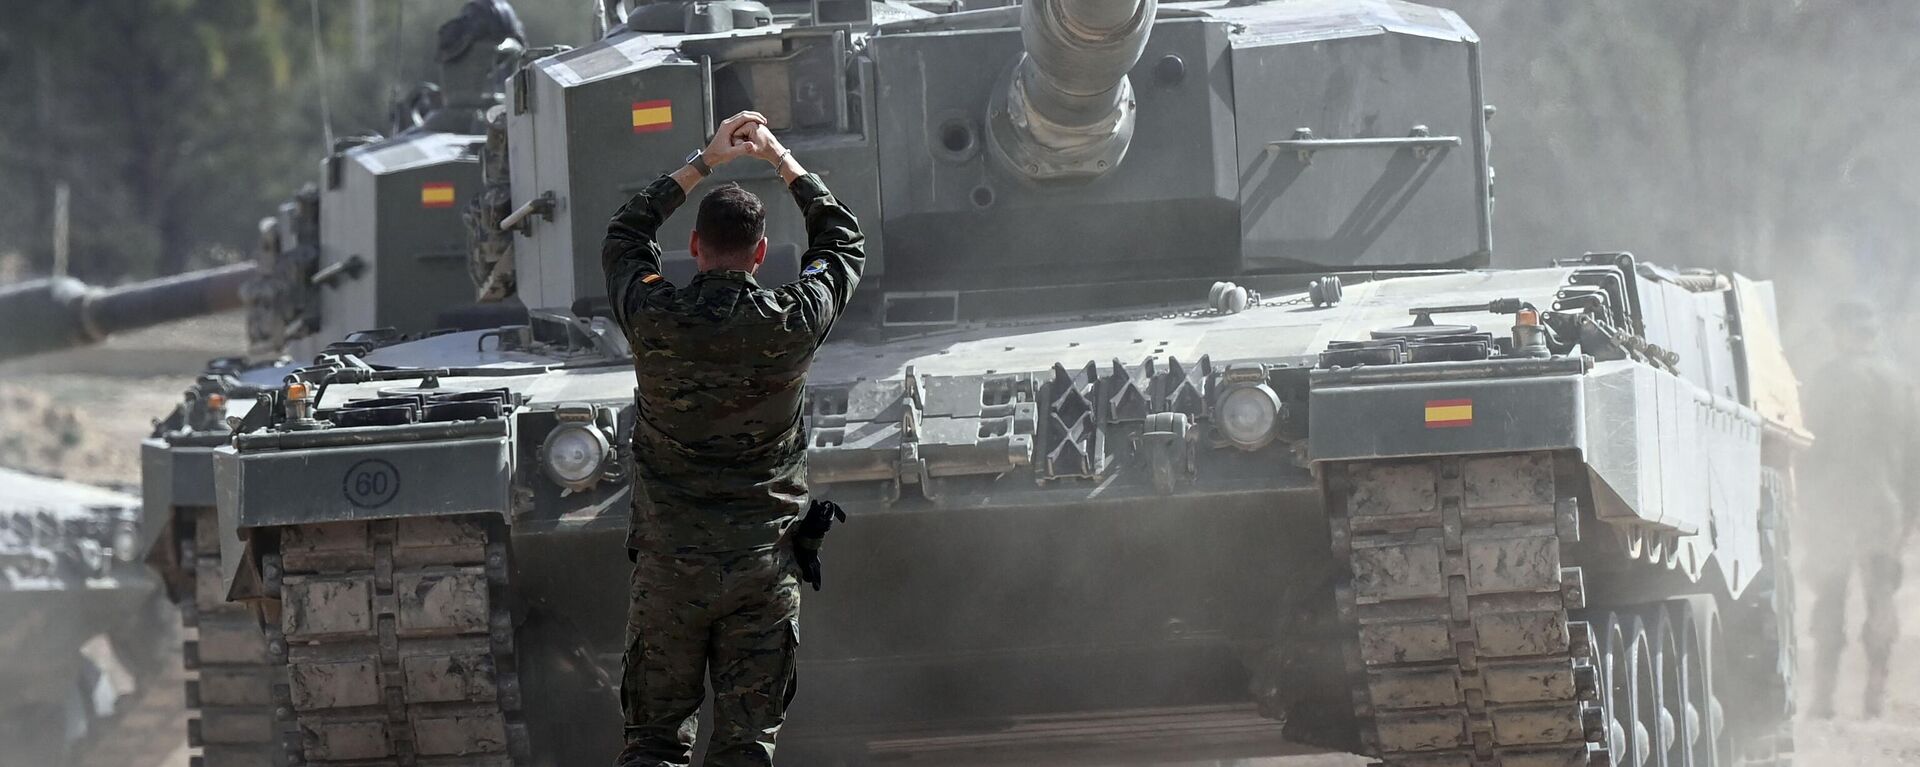 Ukrainian military personnel receive armoured manoeuvre training on German-made Leopard 2 battle tanks at the Spanish army's training centre of San Gregorio in Zaragoza on March 13, 2023 - Sputnik International, 1920, 13.05.2023